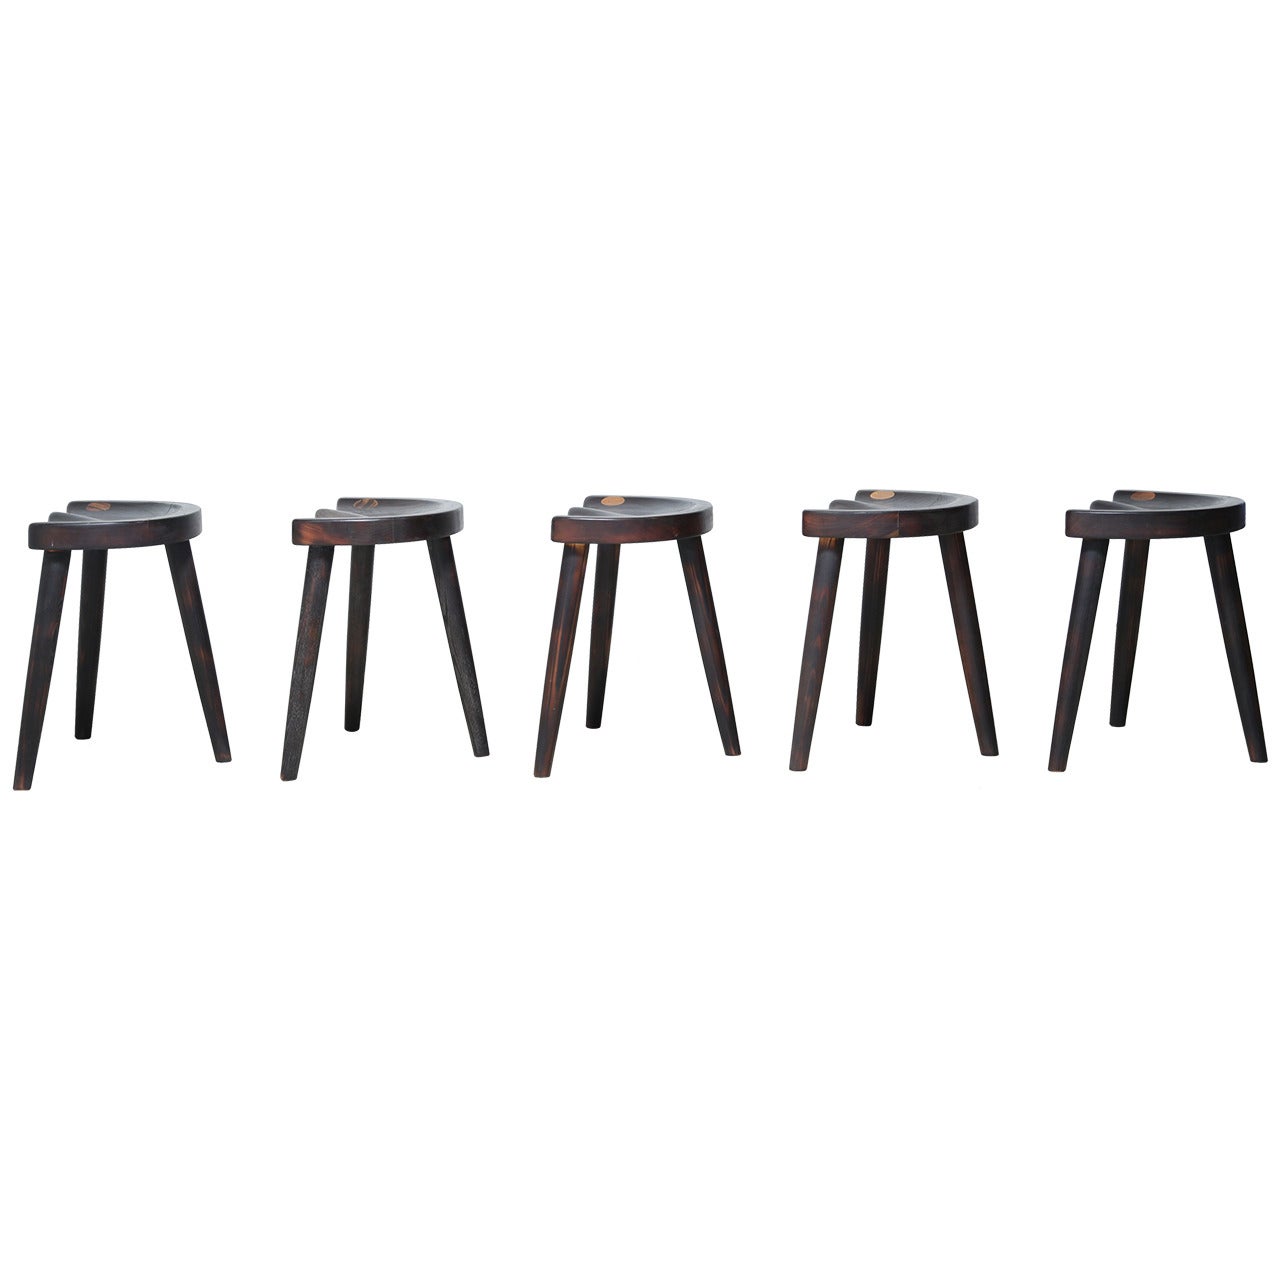 Robert Roakes Handcrafted Tripod Studio Stools, USA, 1970s For Sale